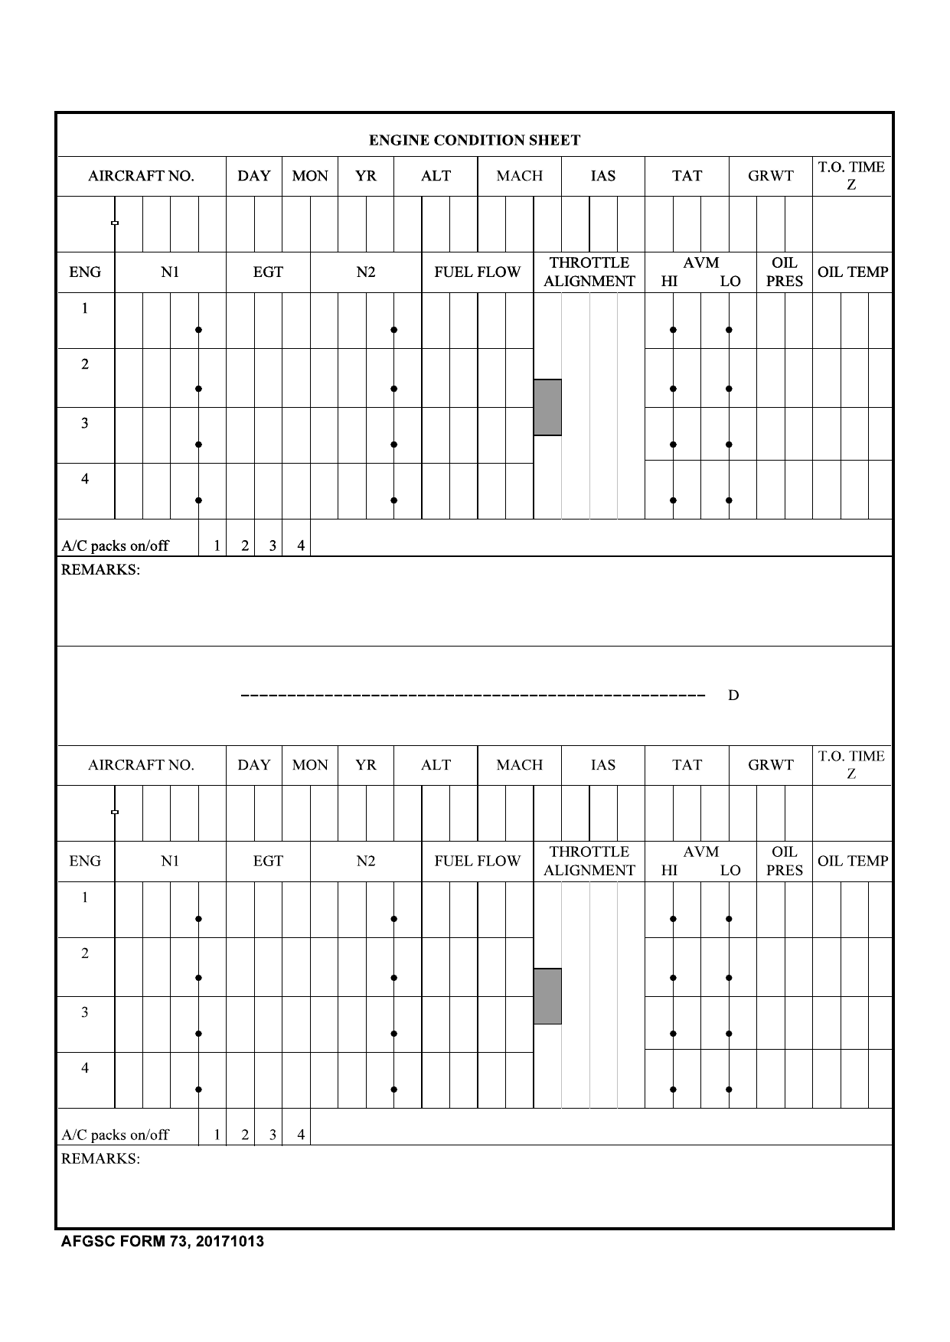 AFGSC Form 73 Engine Condition Sheet, Page 1